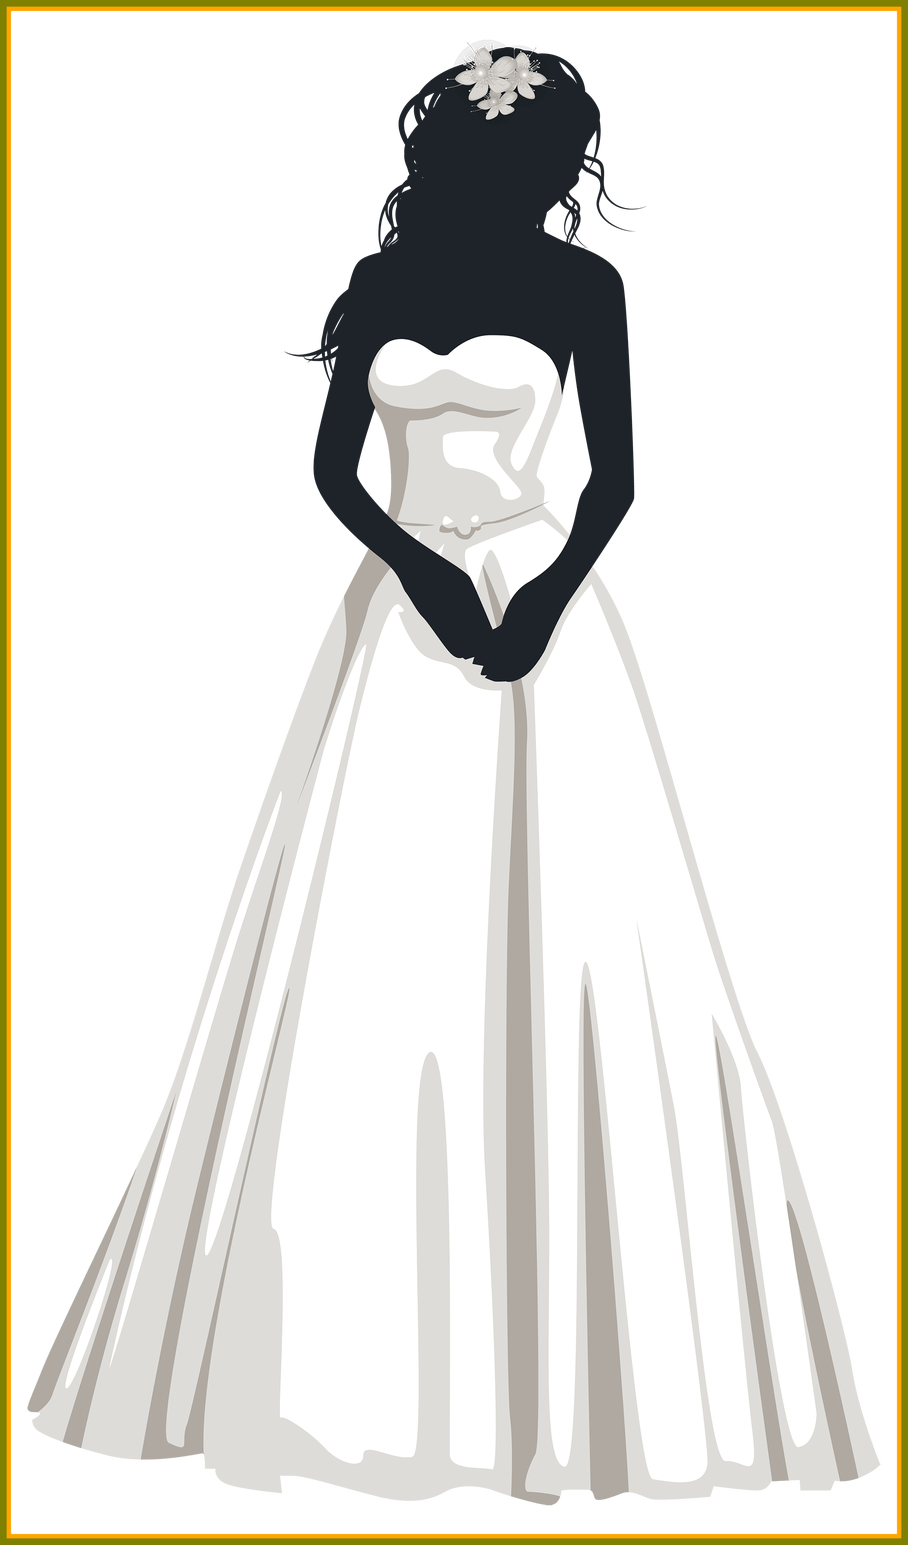 marriage clipart mangalsutra